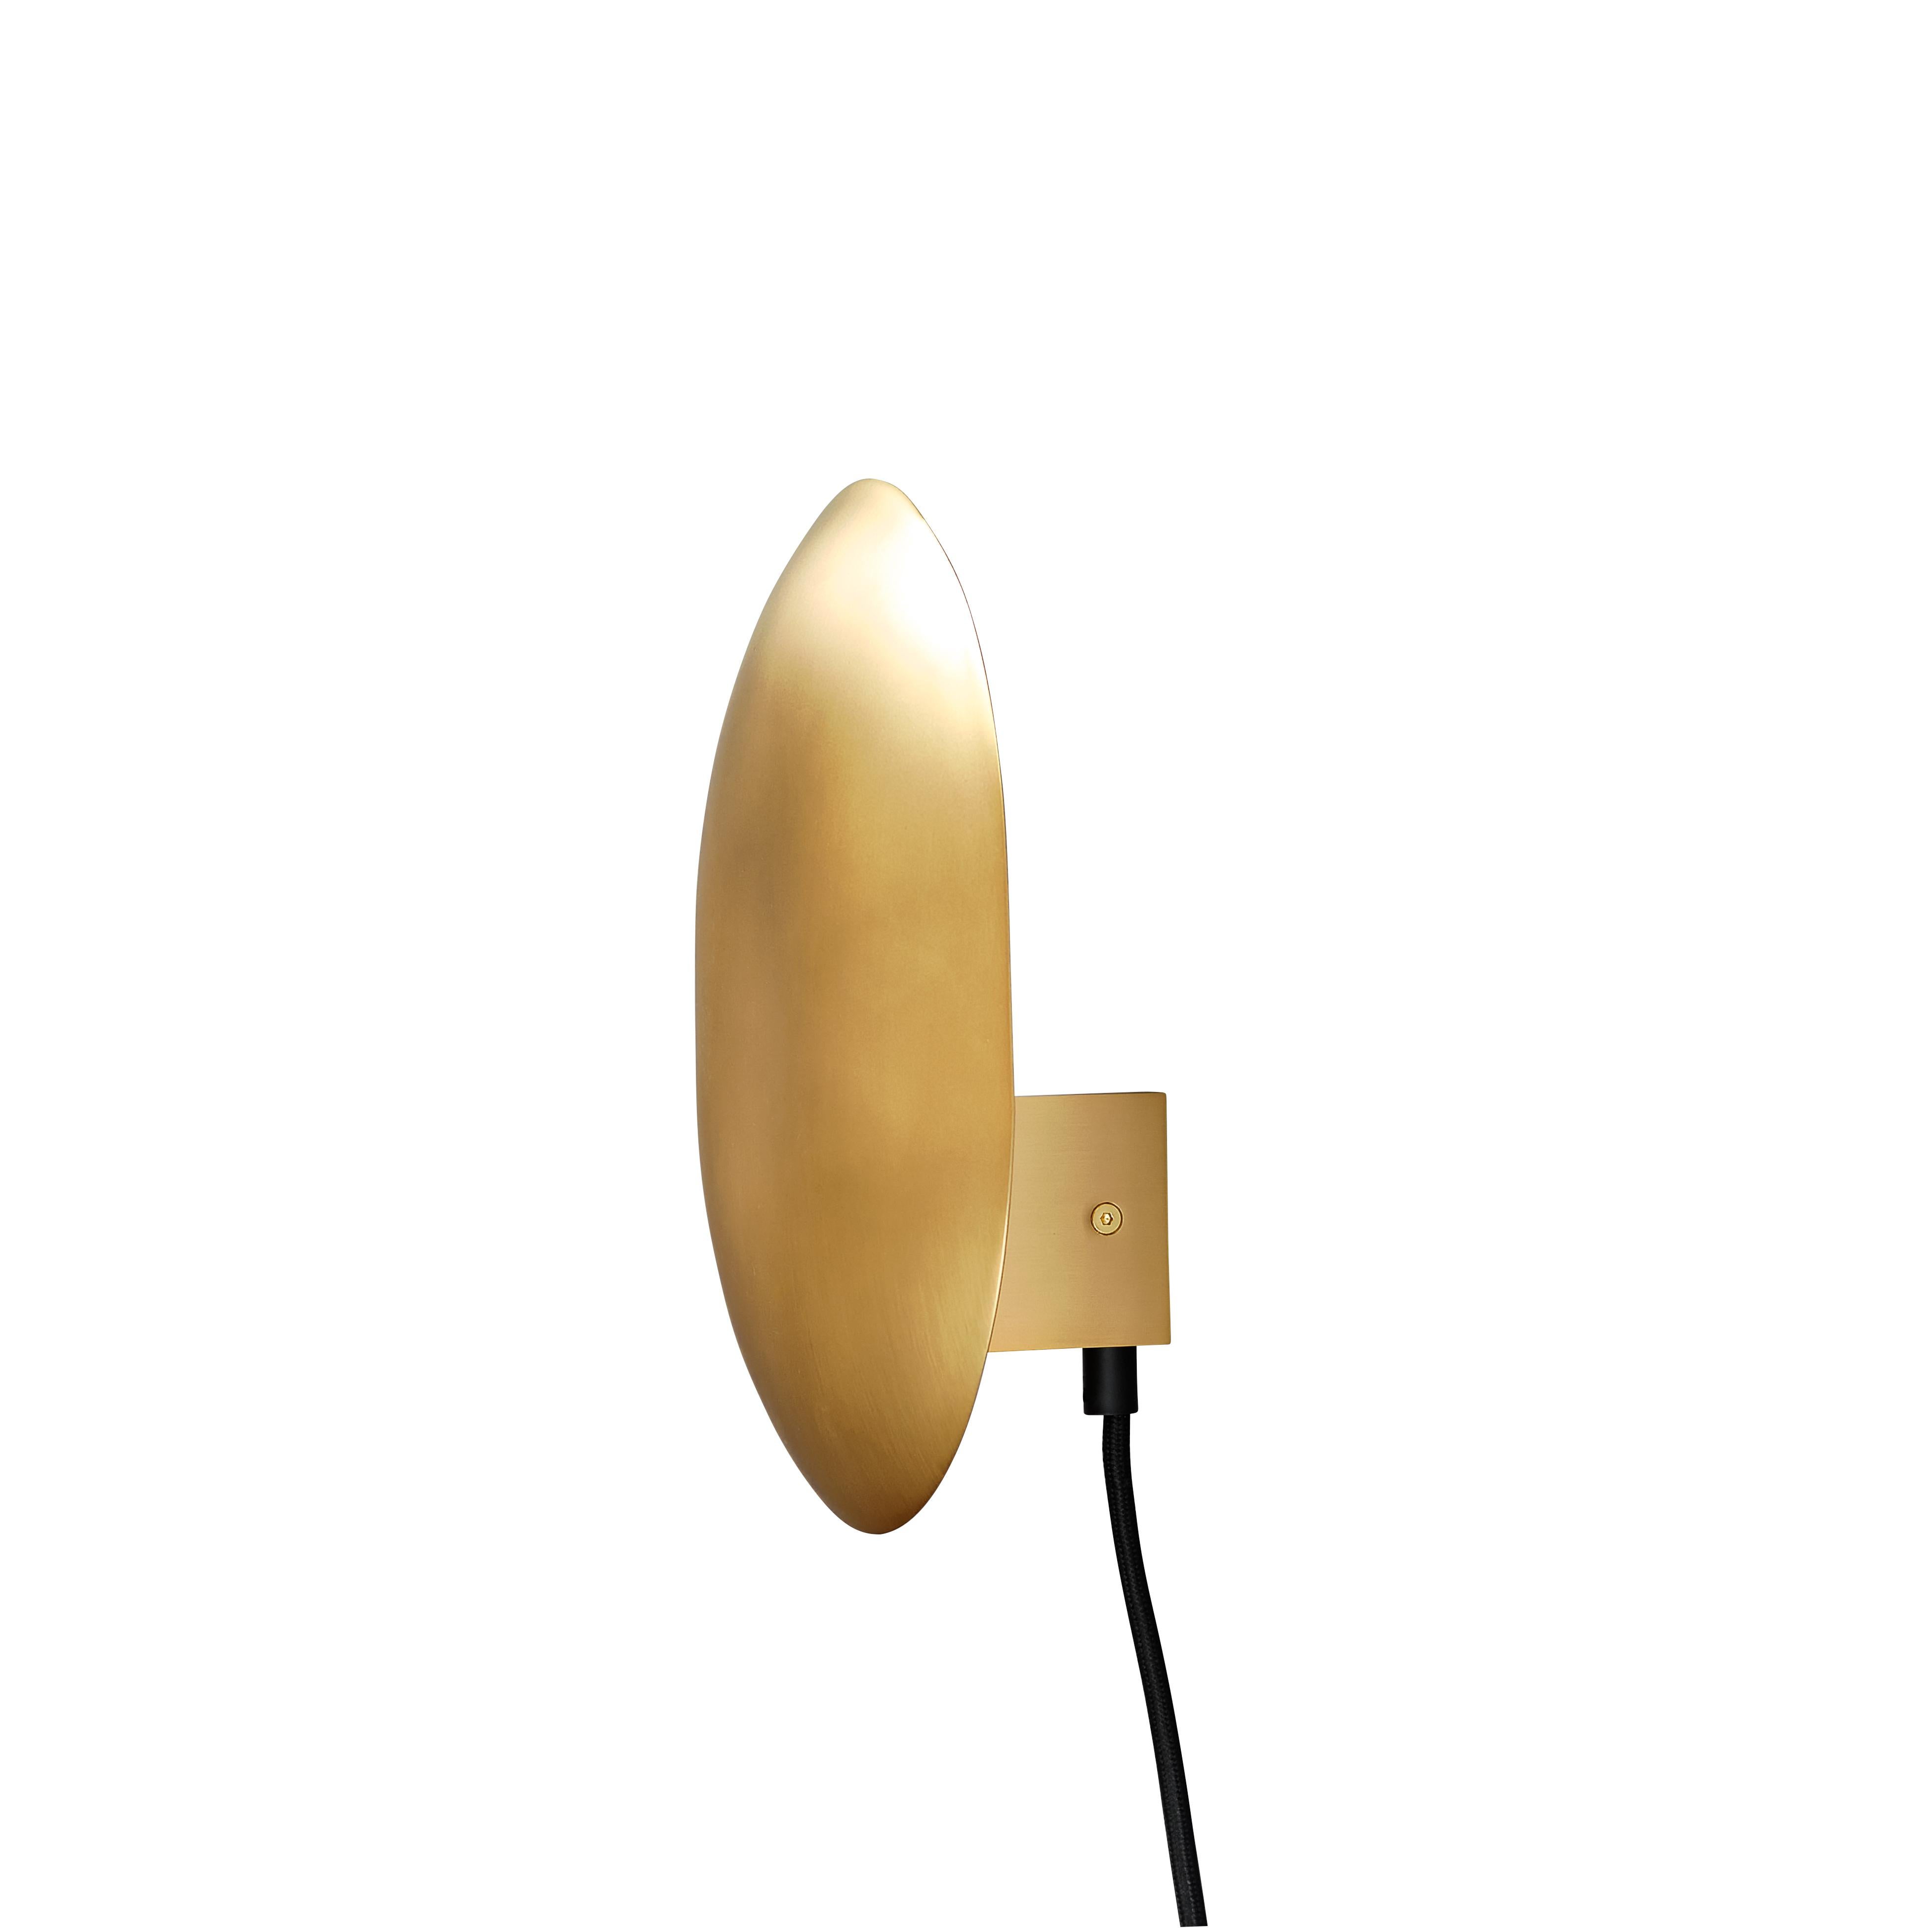 Brass clam wall lamp by 101 Copenhagen
Designed by Kristian Sofus Hansen & Tommy Hyldahl
Dimensions: L 14 x W 22 x H 26 cm
Cable length: 170 cm
This product is not wired for USA
Materials: metal: Plated metal / rass
Cable: fabric covered cable /